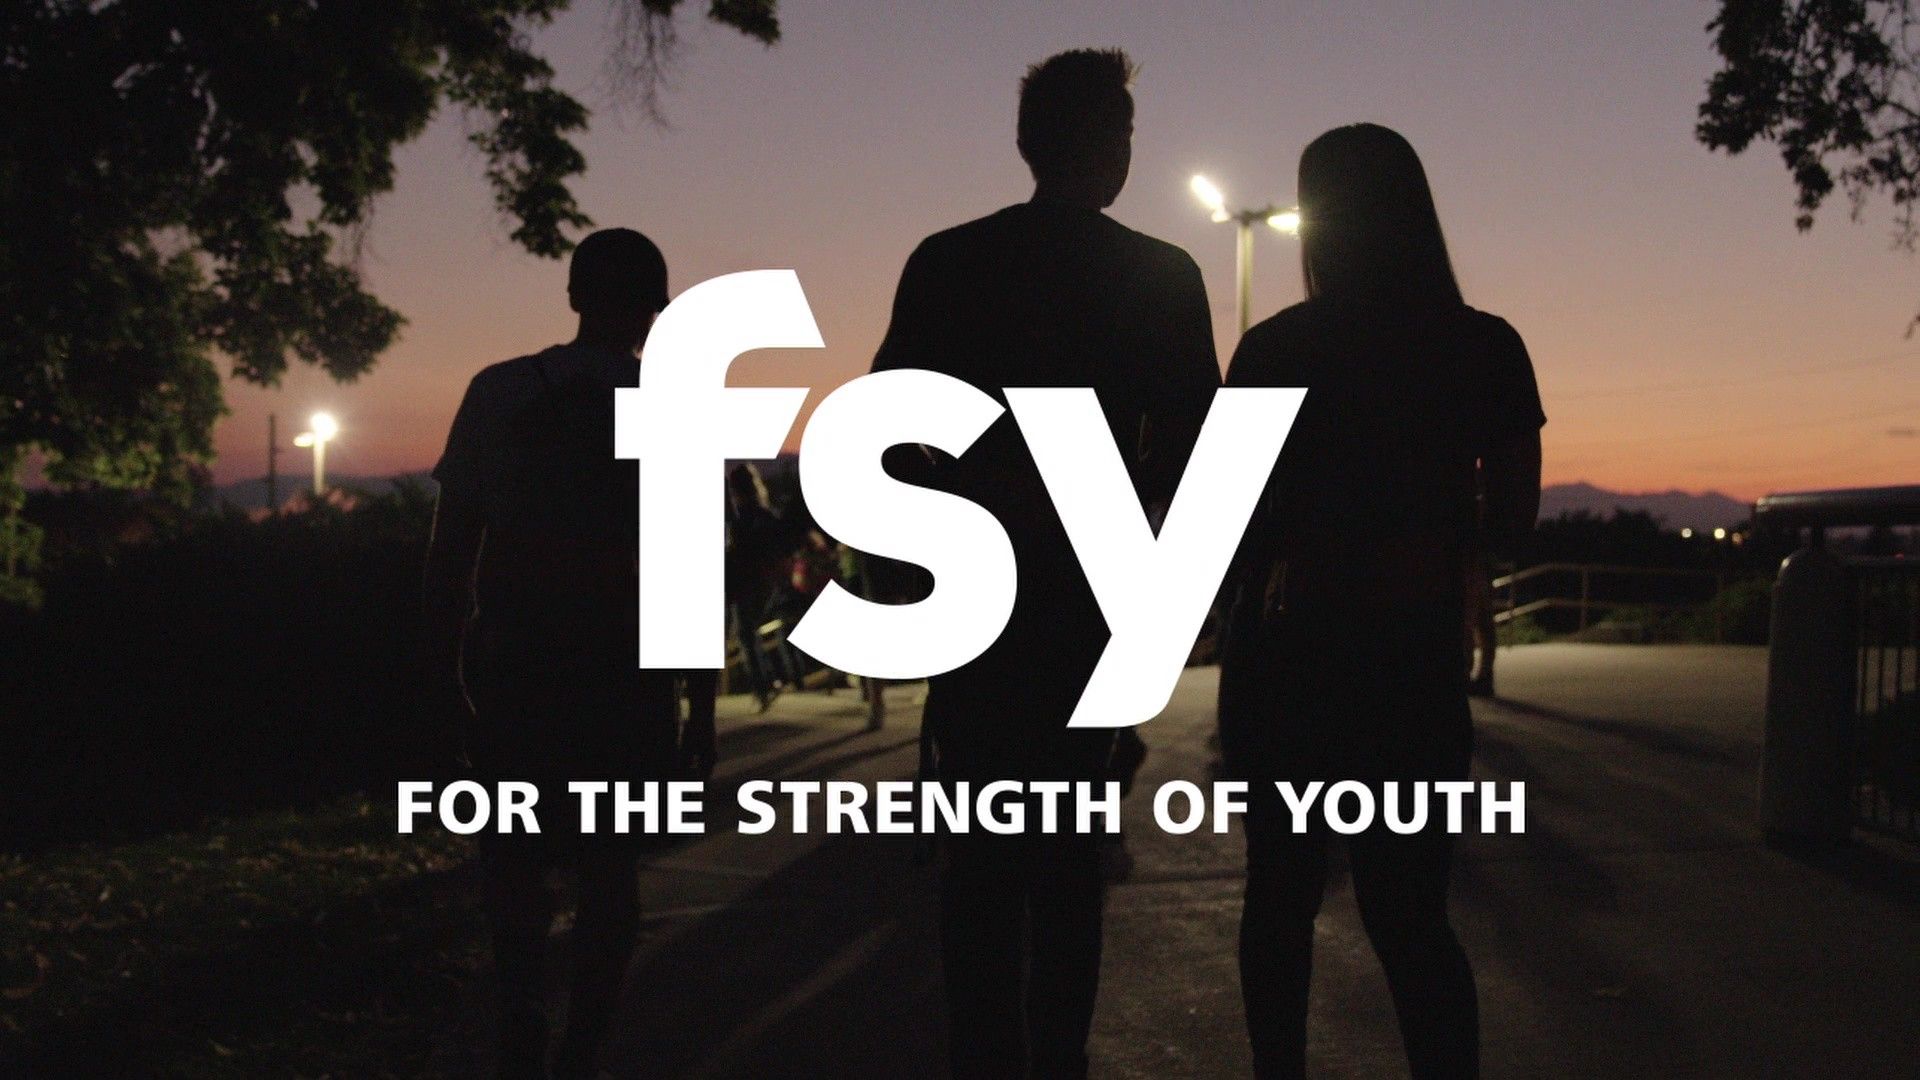 What is FSY?